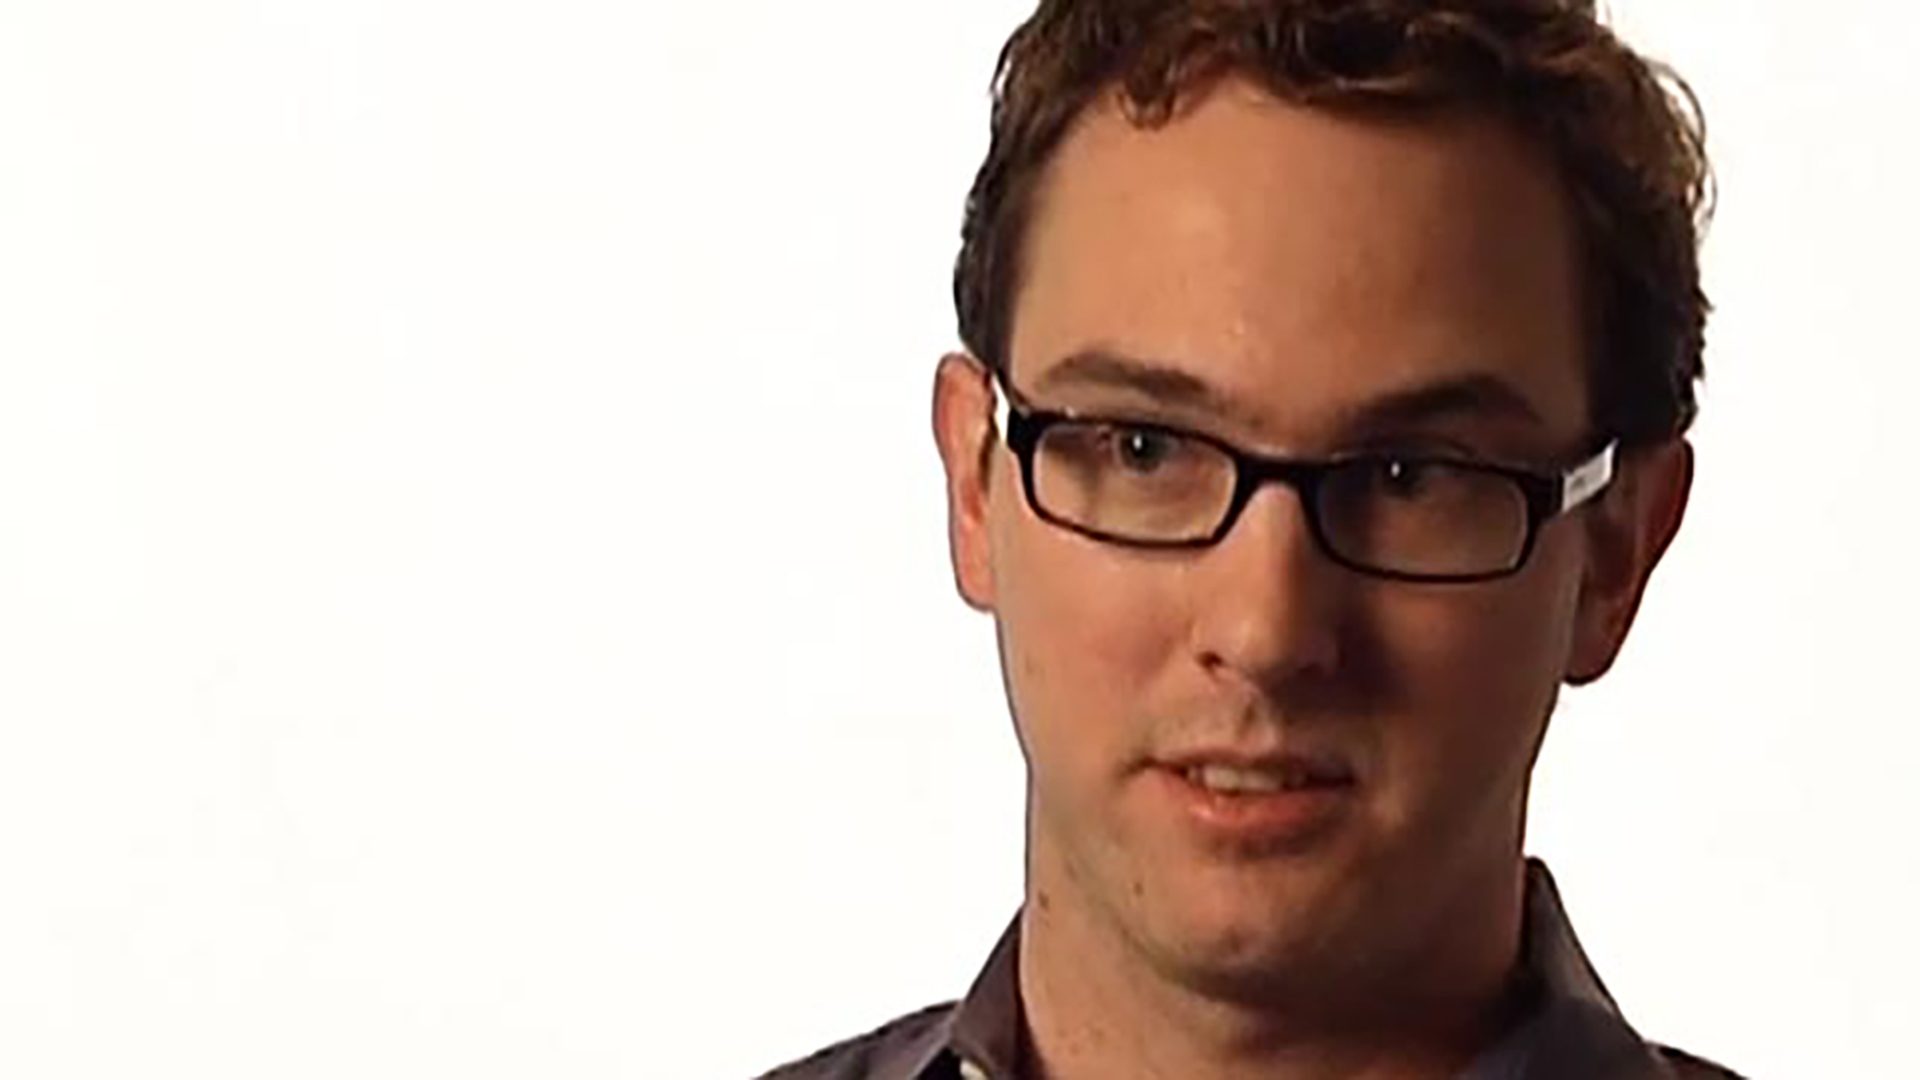 A young adult man wearing black glasses is interviewed against a white background.